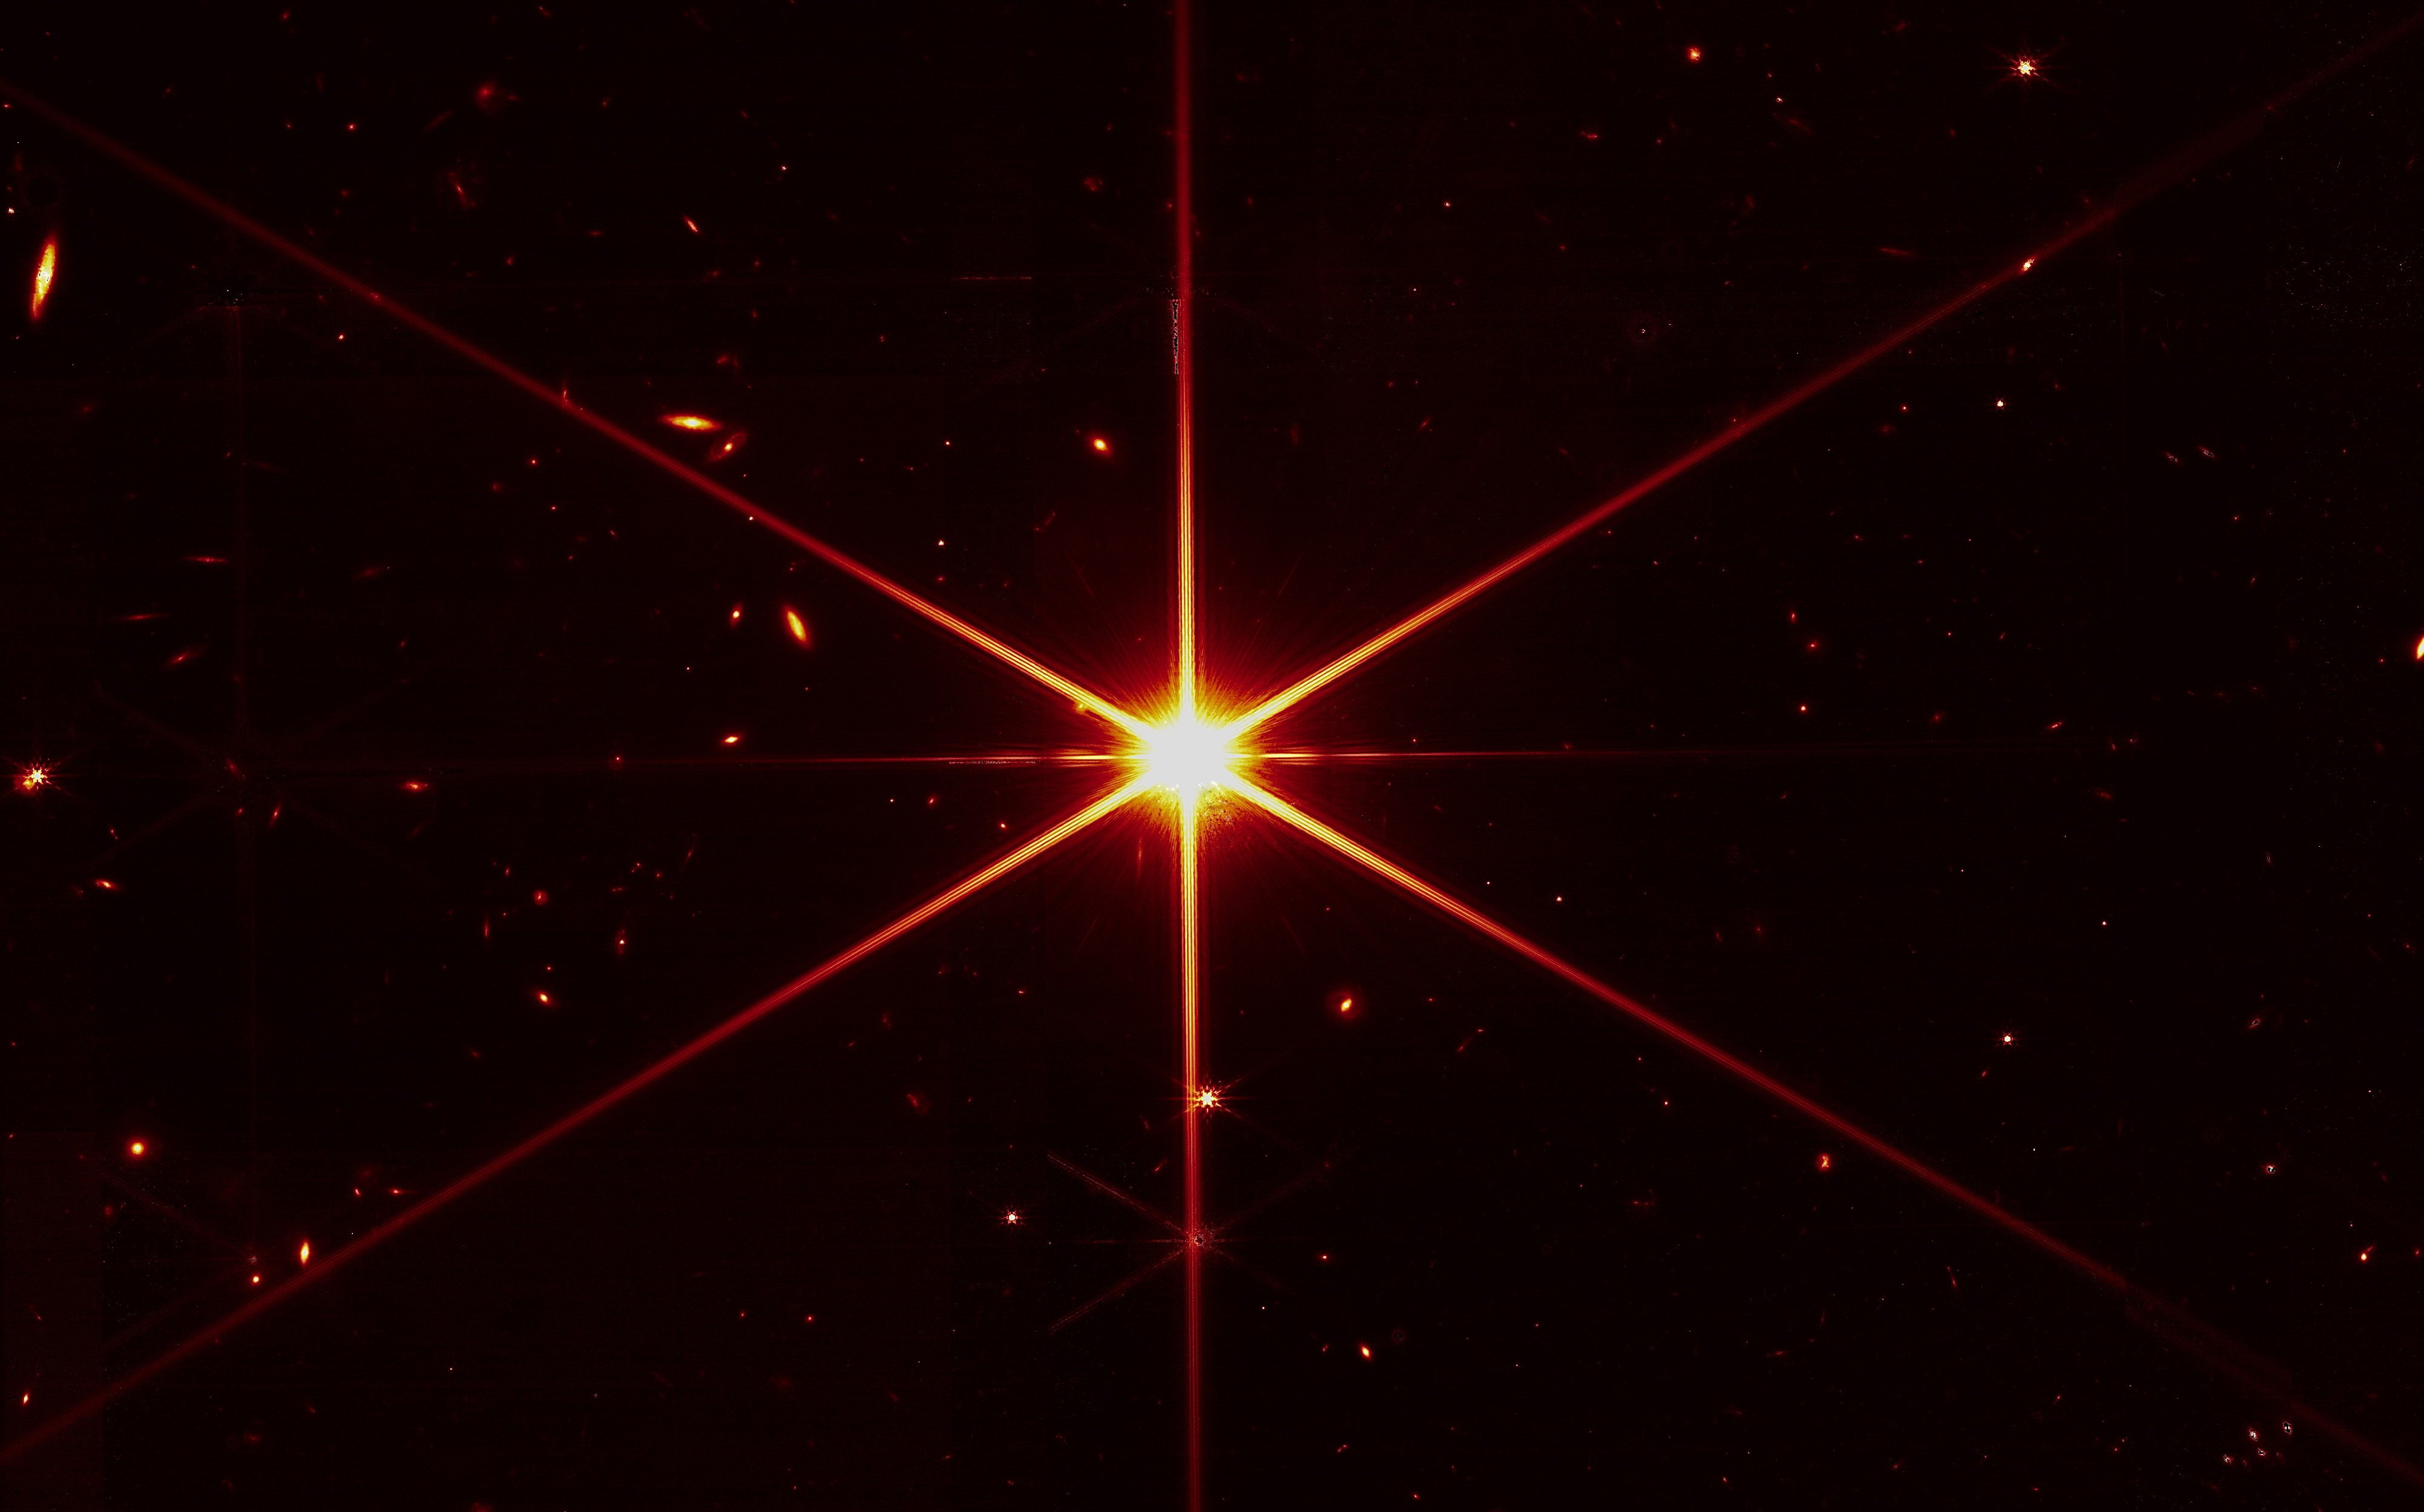 Spikes on star image